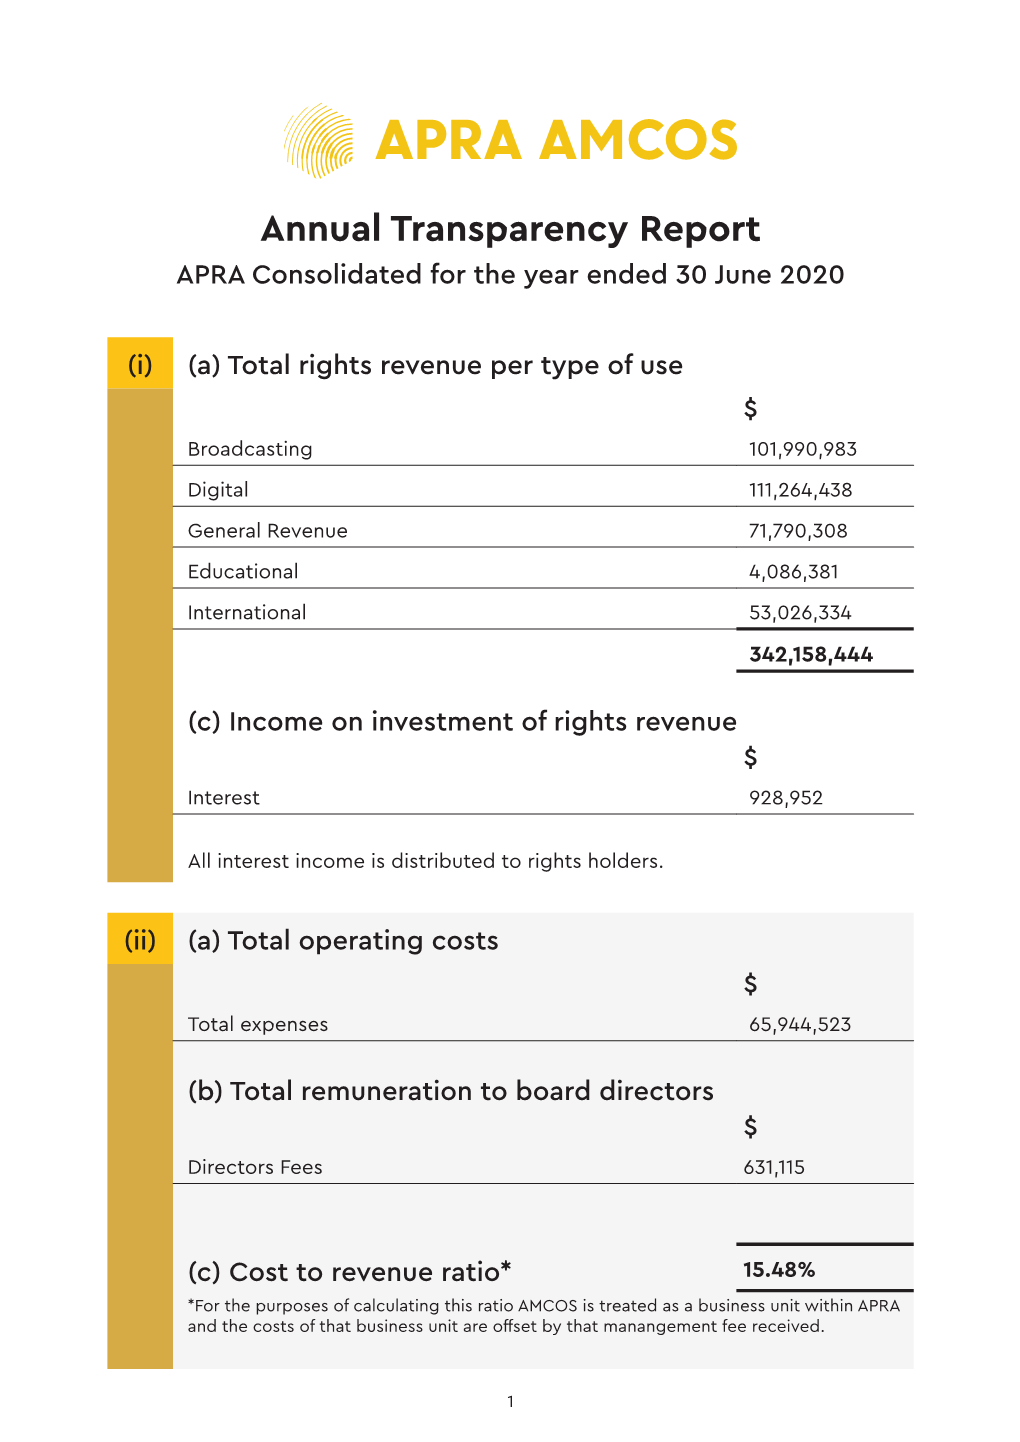 Annual Transparency Report APRA Consolidated for the Year Ended 30 June 2020